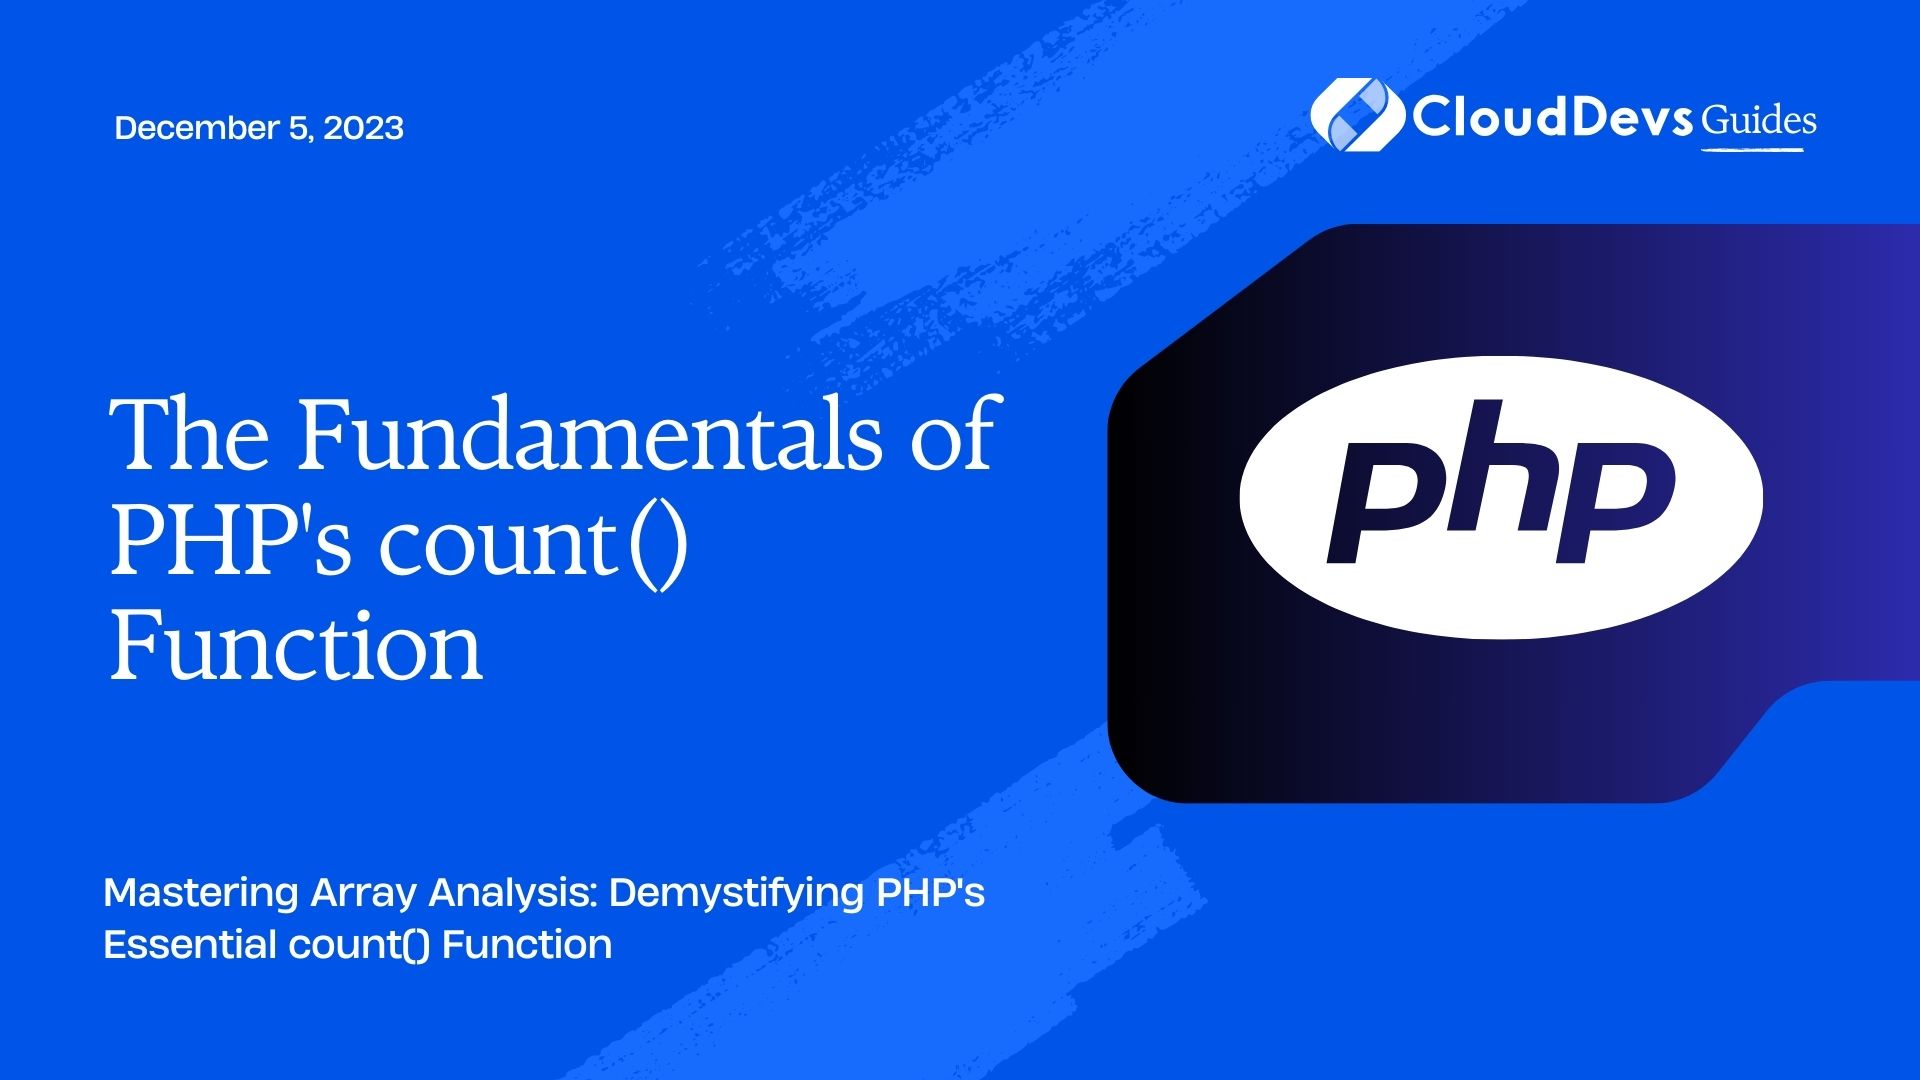 The Fundamentals of PHP's count() Function